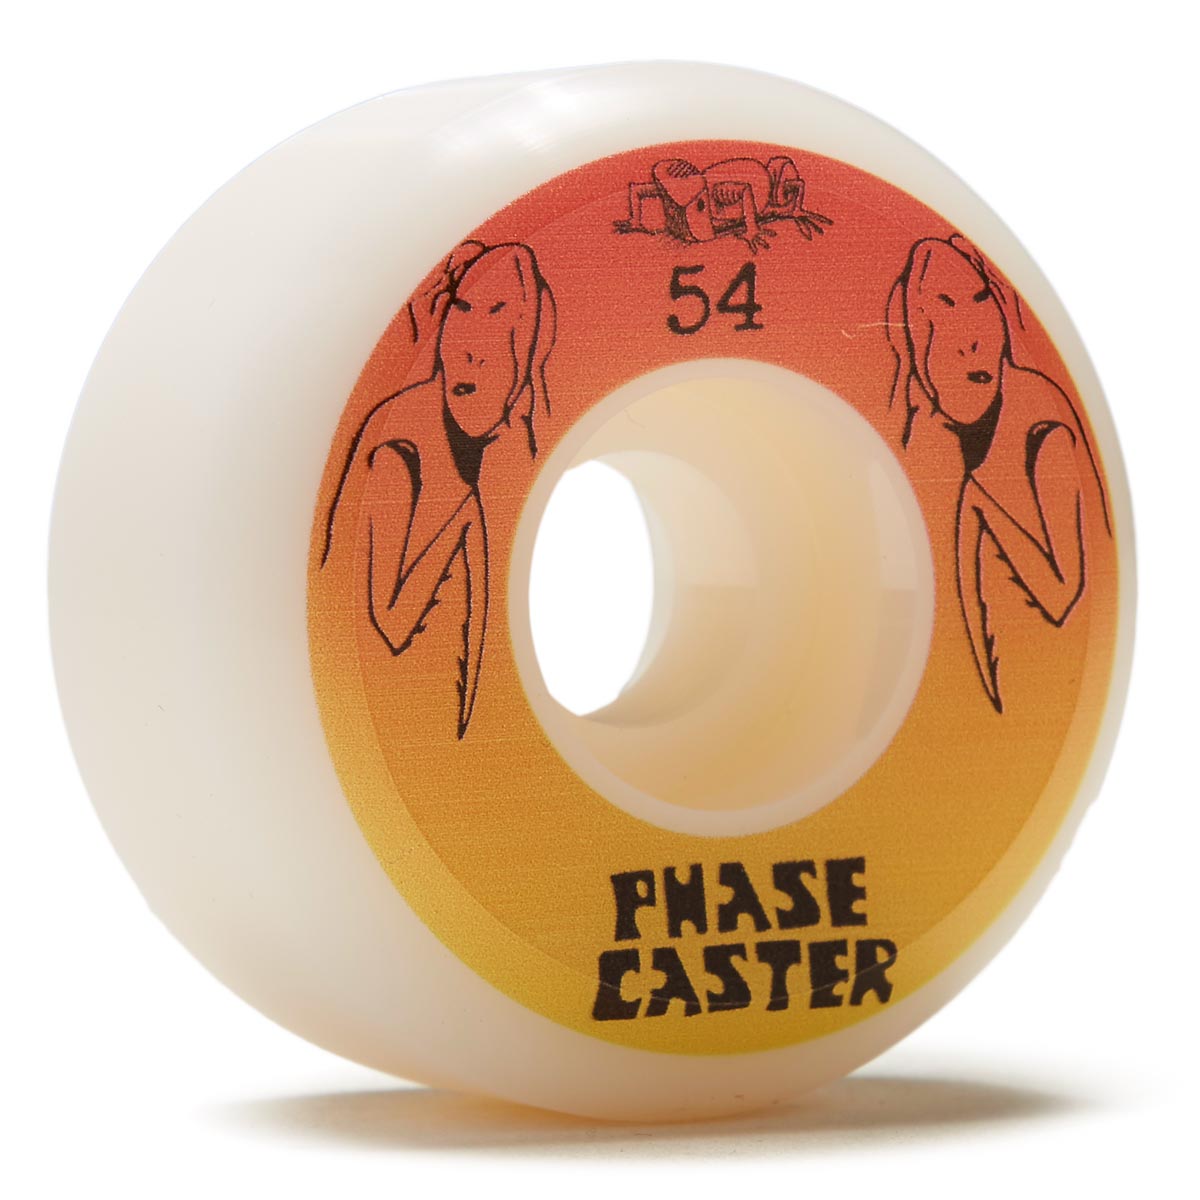 The Heated Wheel Phasecaster Mantis Man 101a Skateboard Wheels - 54mm image 1